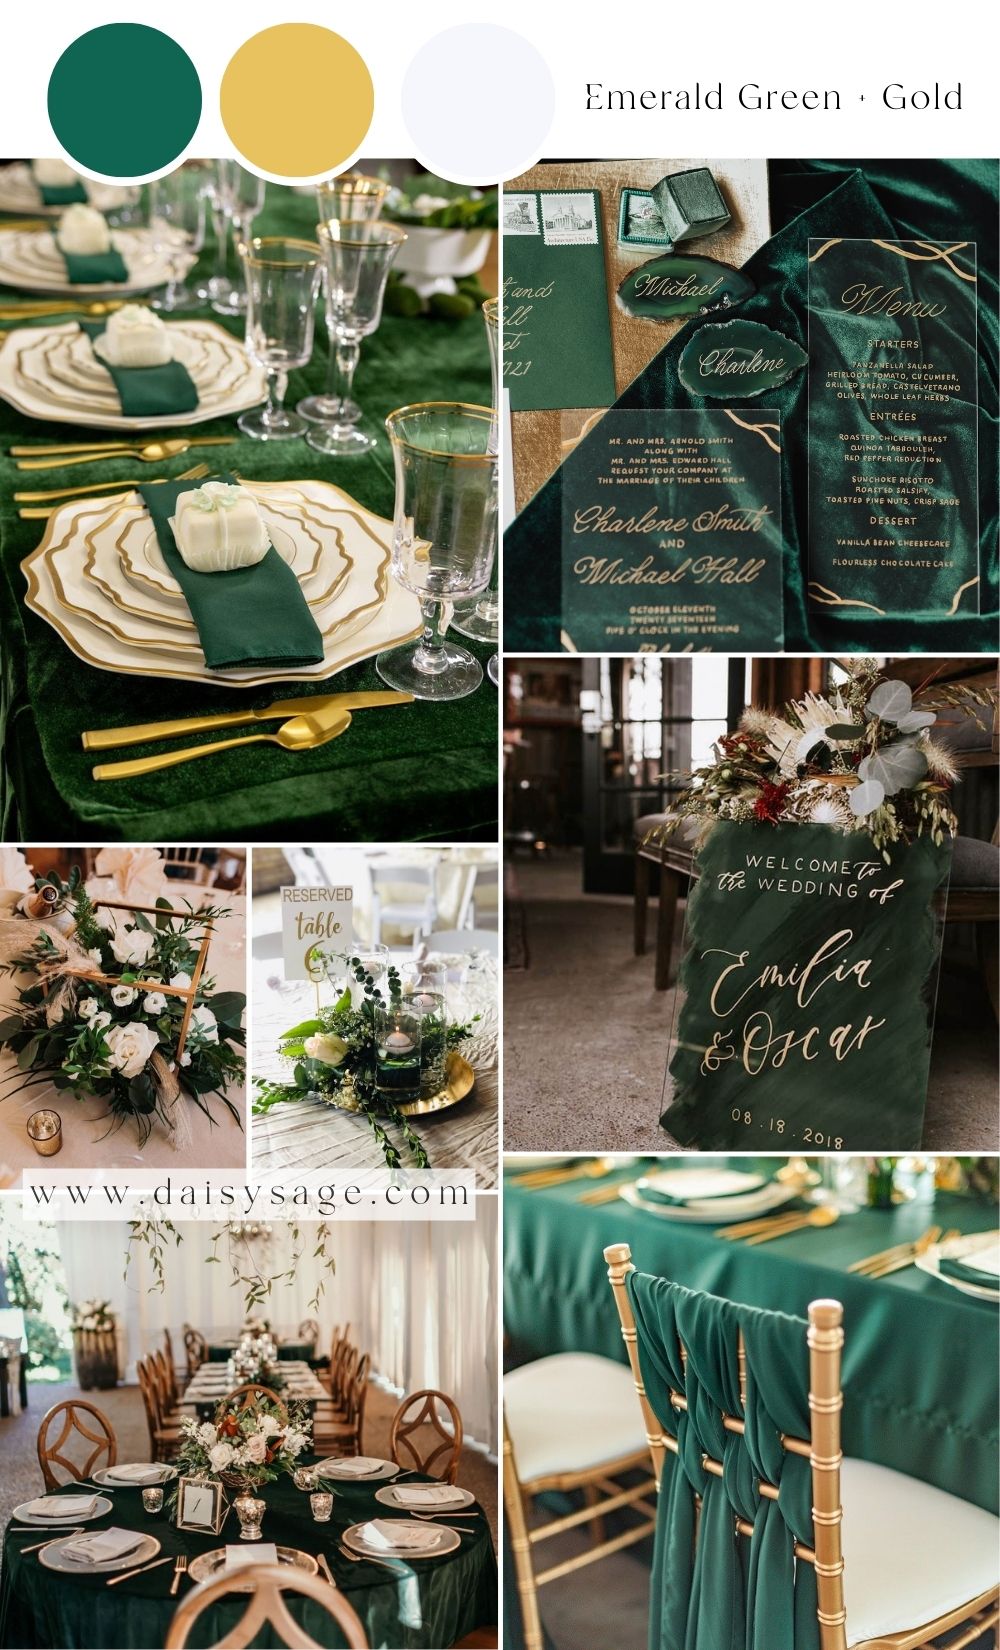 Emerald Green and Gold Wedding Color Theme